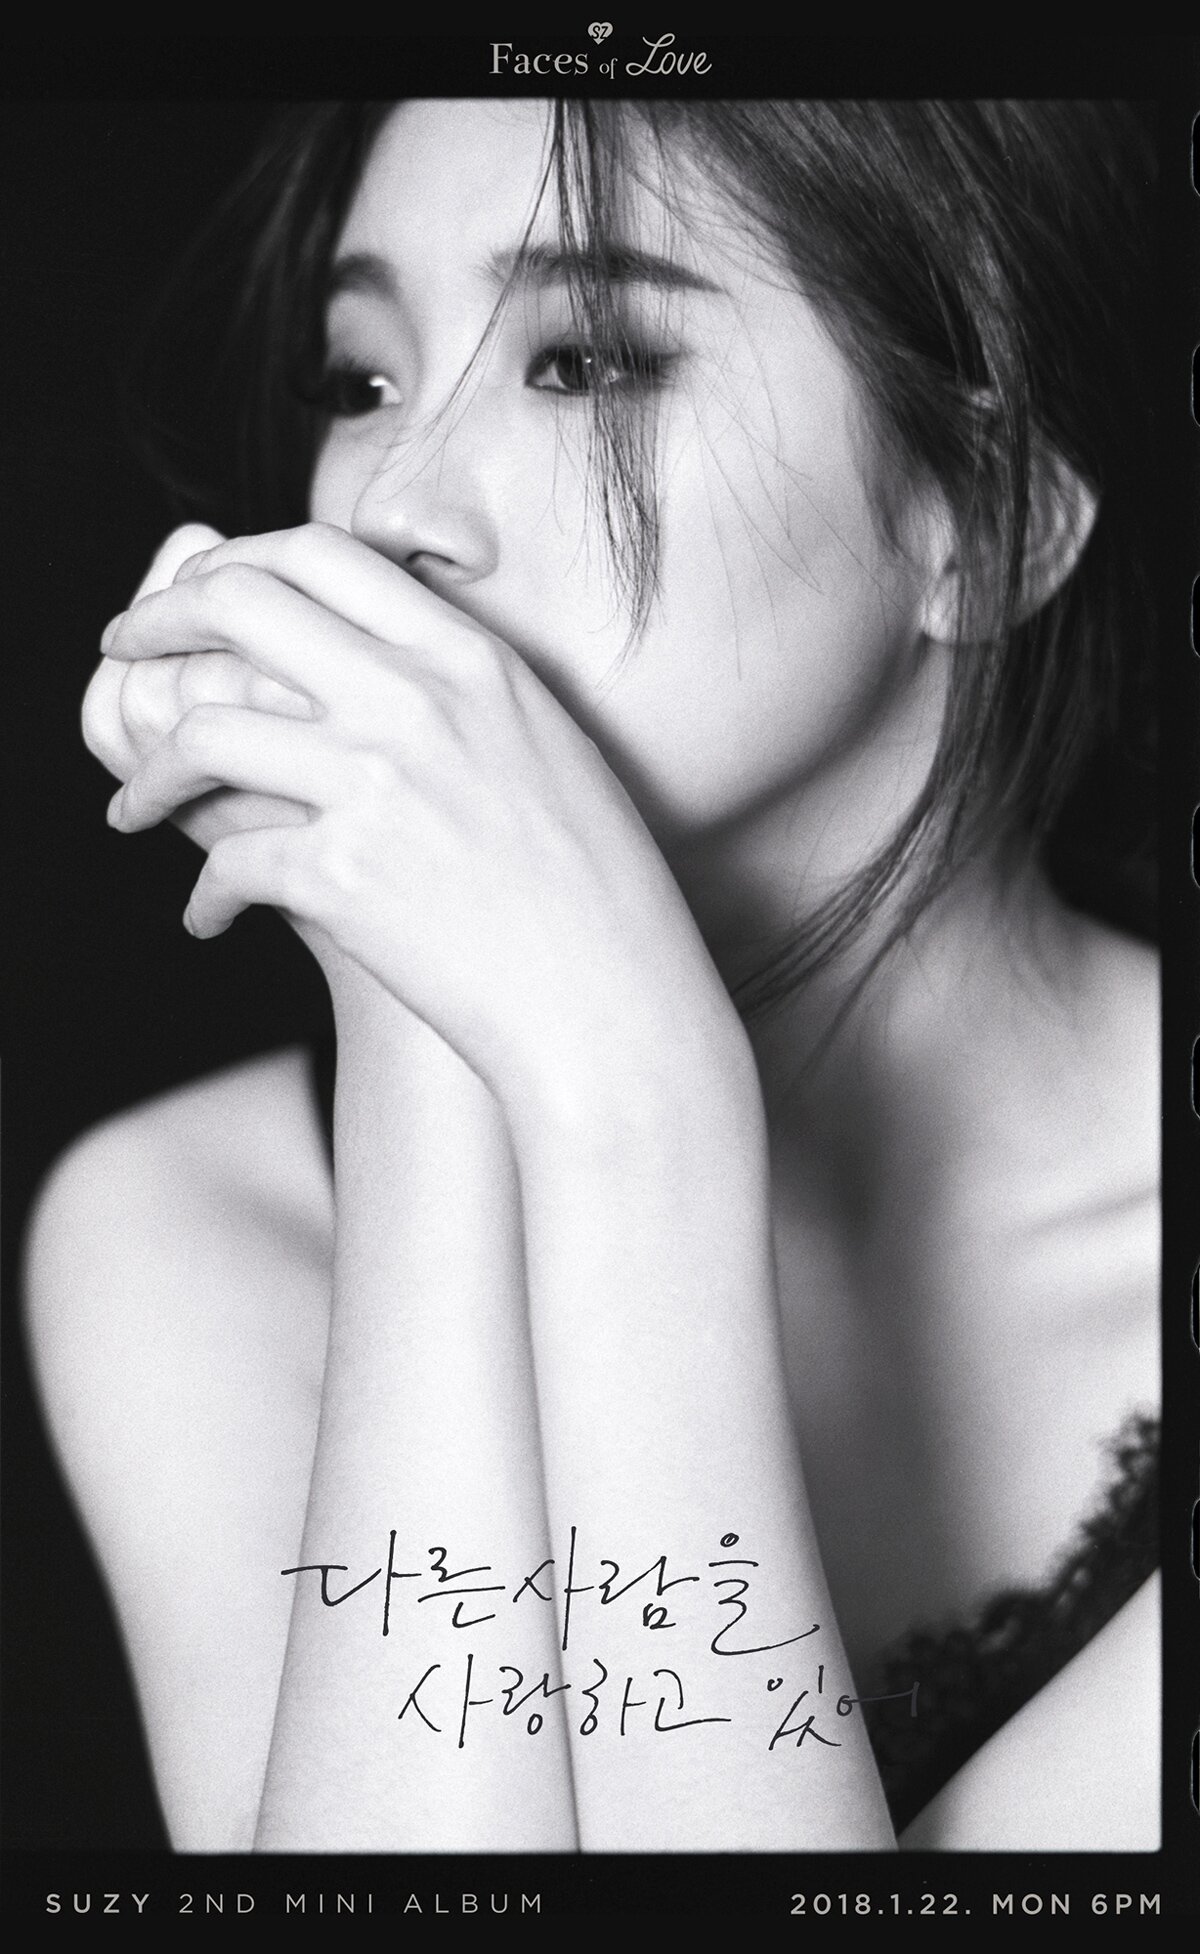 Suzy - Faces of Love 2nd Mini Album teasers | kpopping